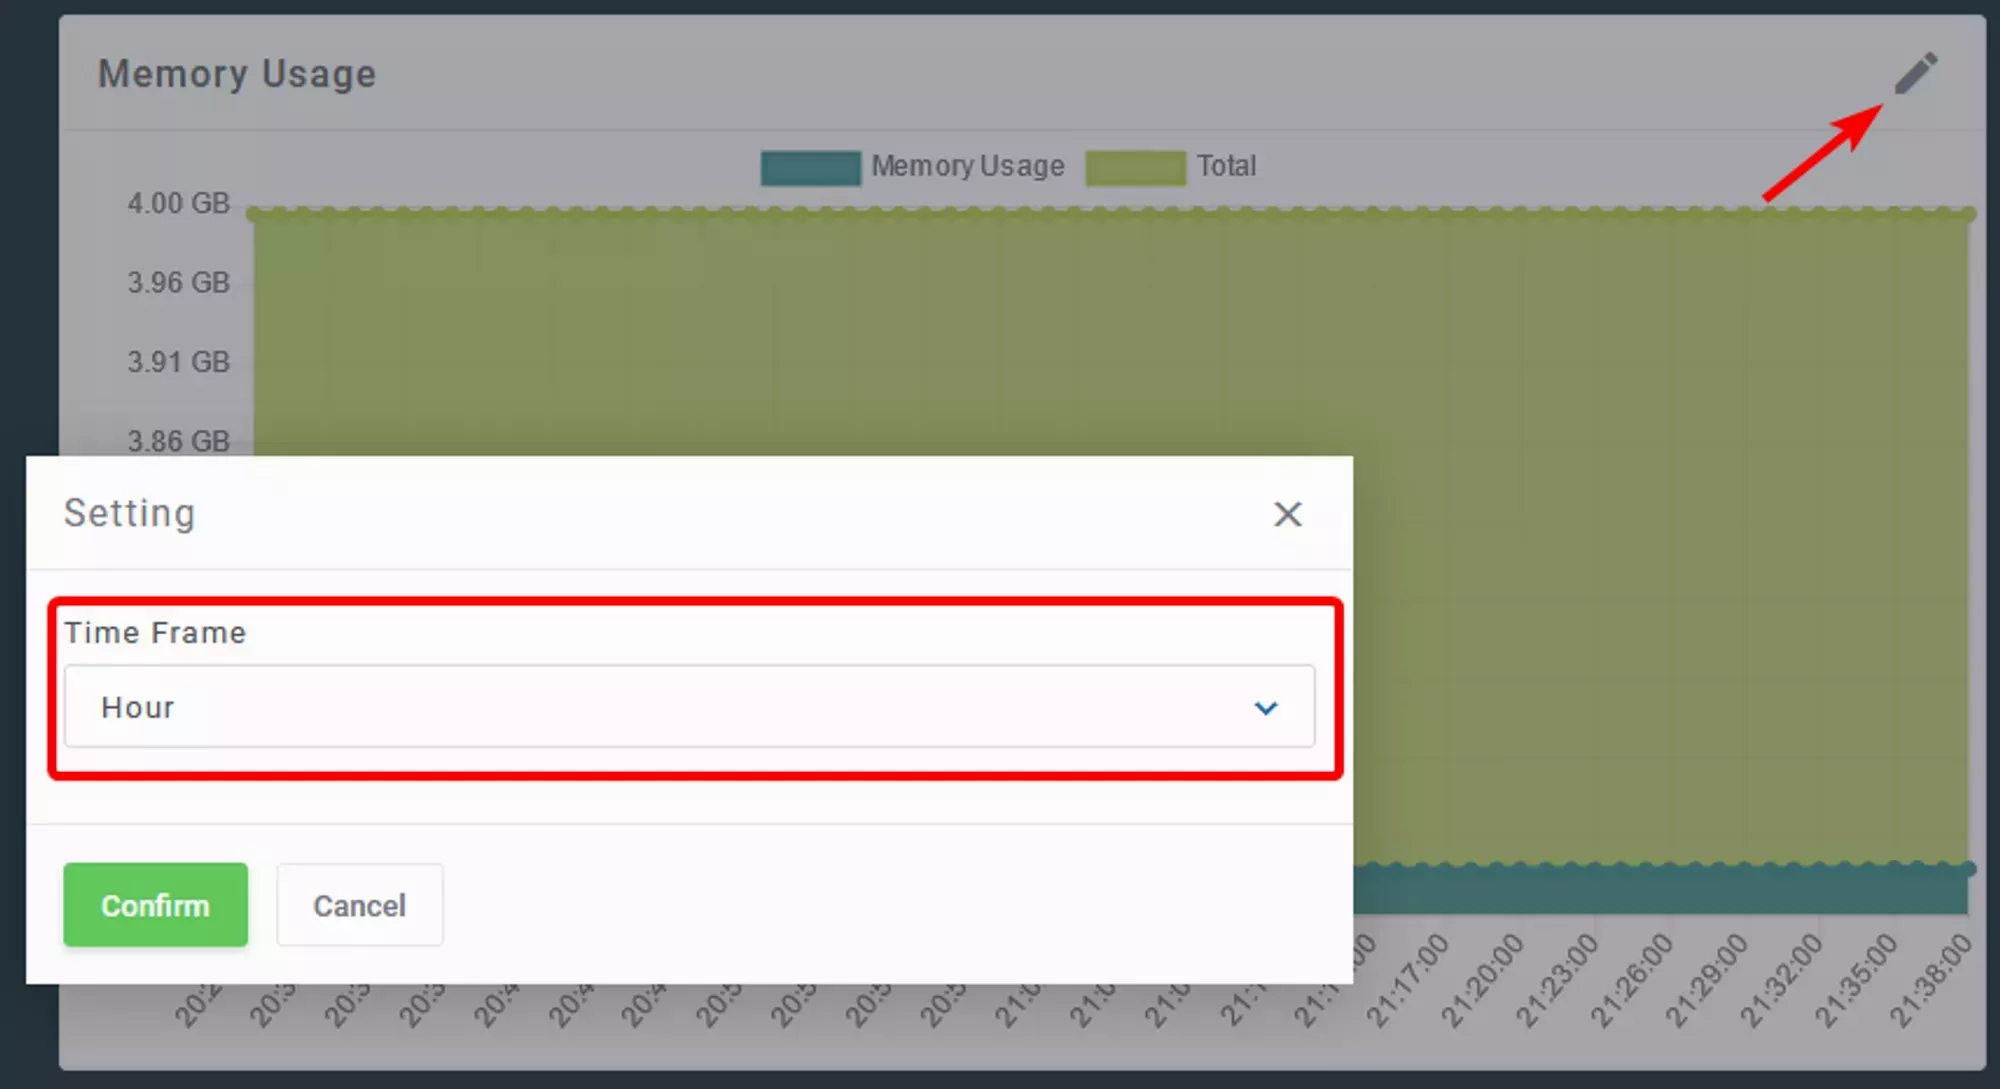 The Firewall Graphs page with the Time Frame setting selected